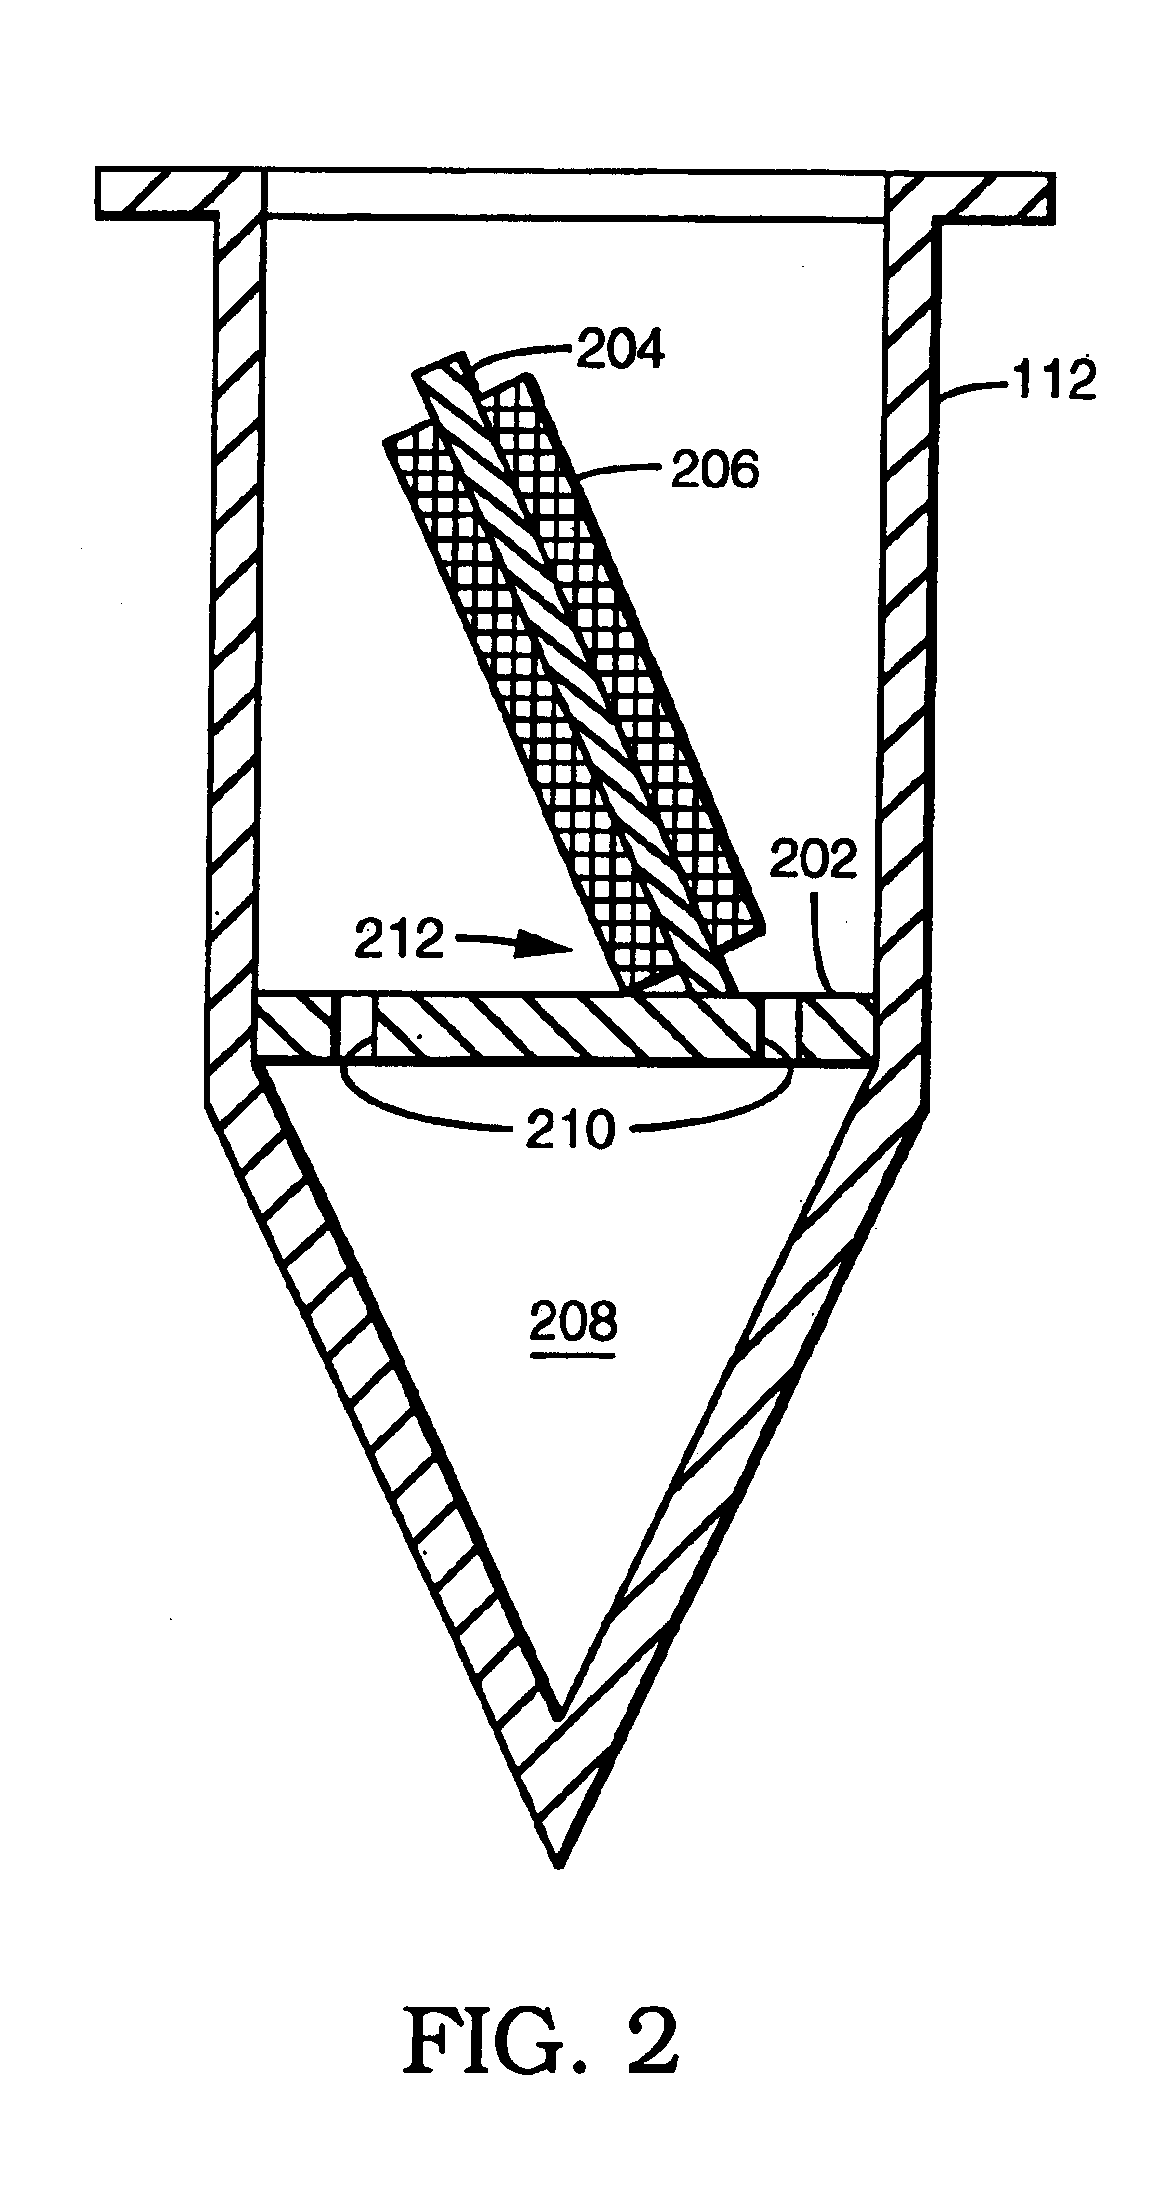 System for the process of coating implantable medical devices